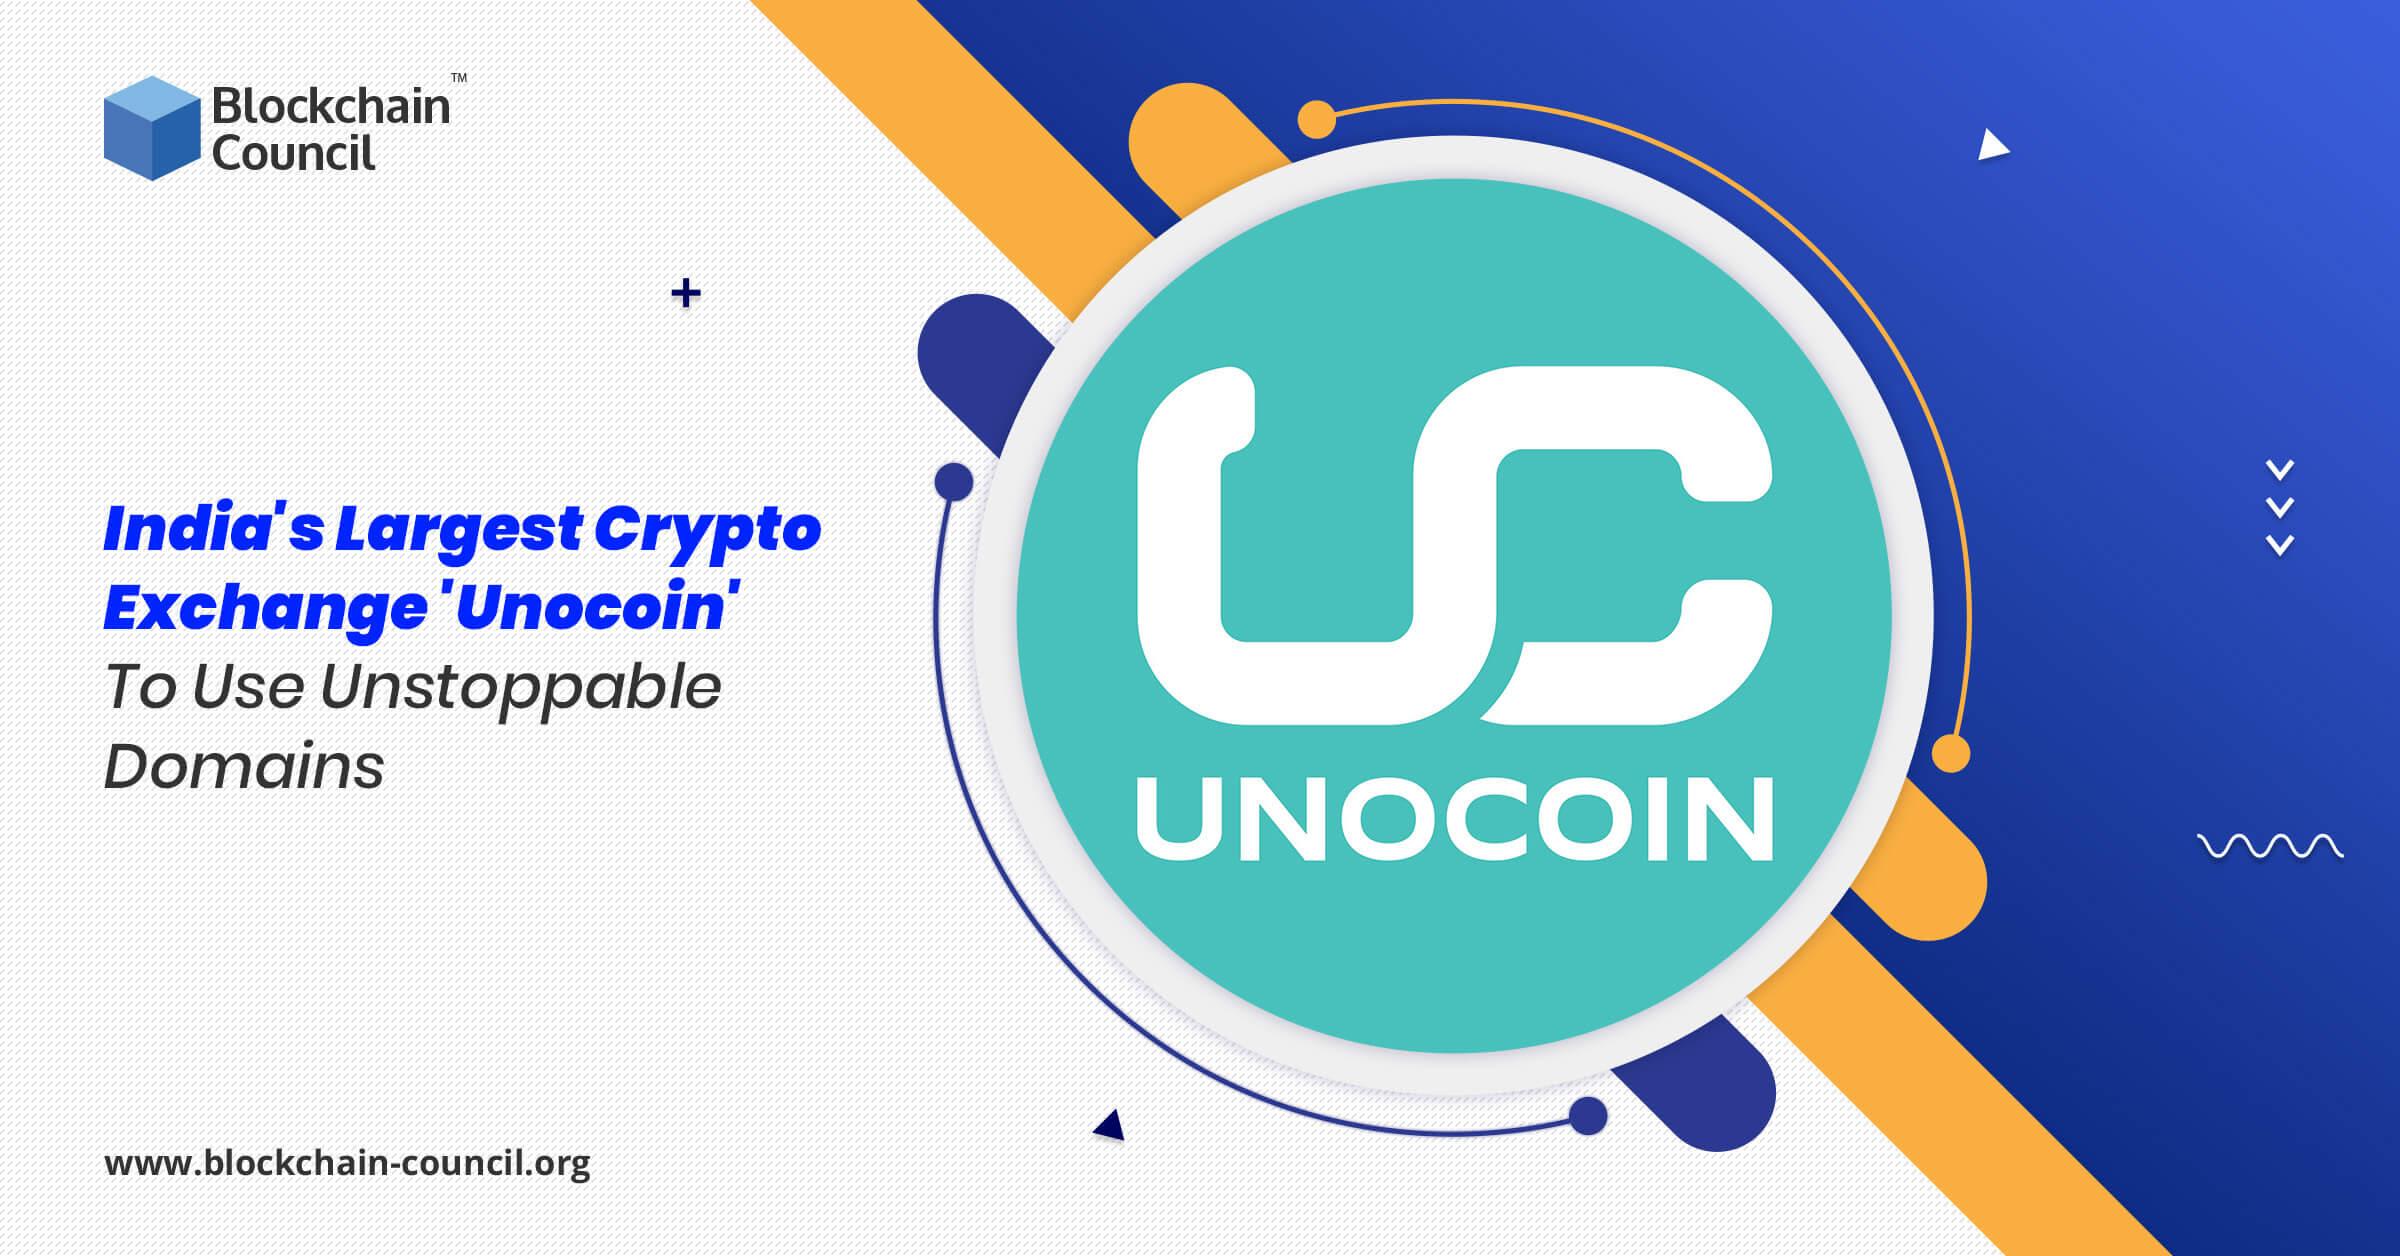 India's Largest Crypto Exchange 'Unocoin' To Use Unstoppable Domains